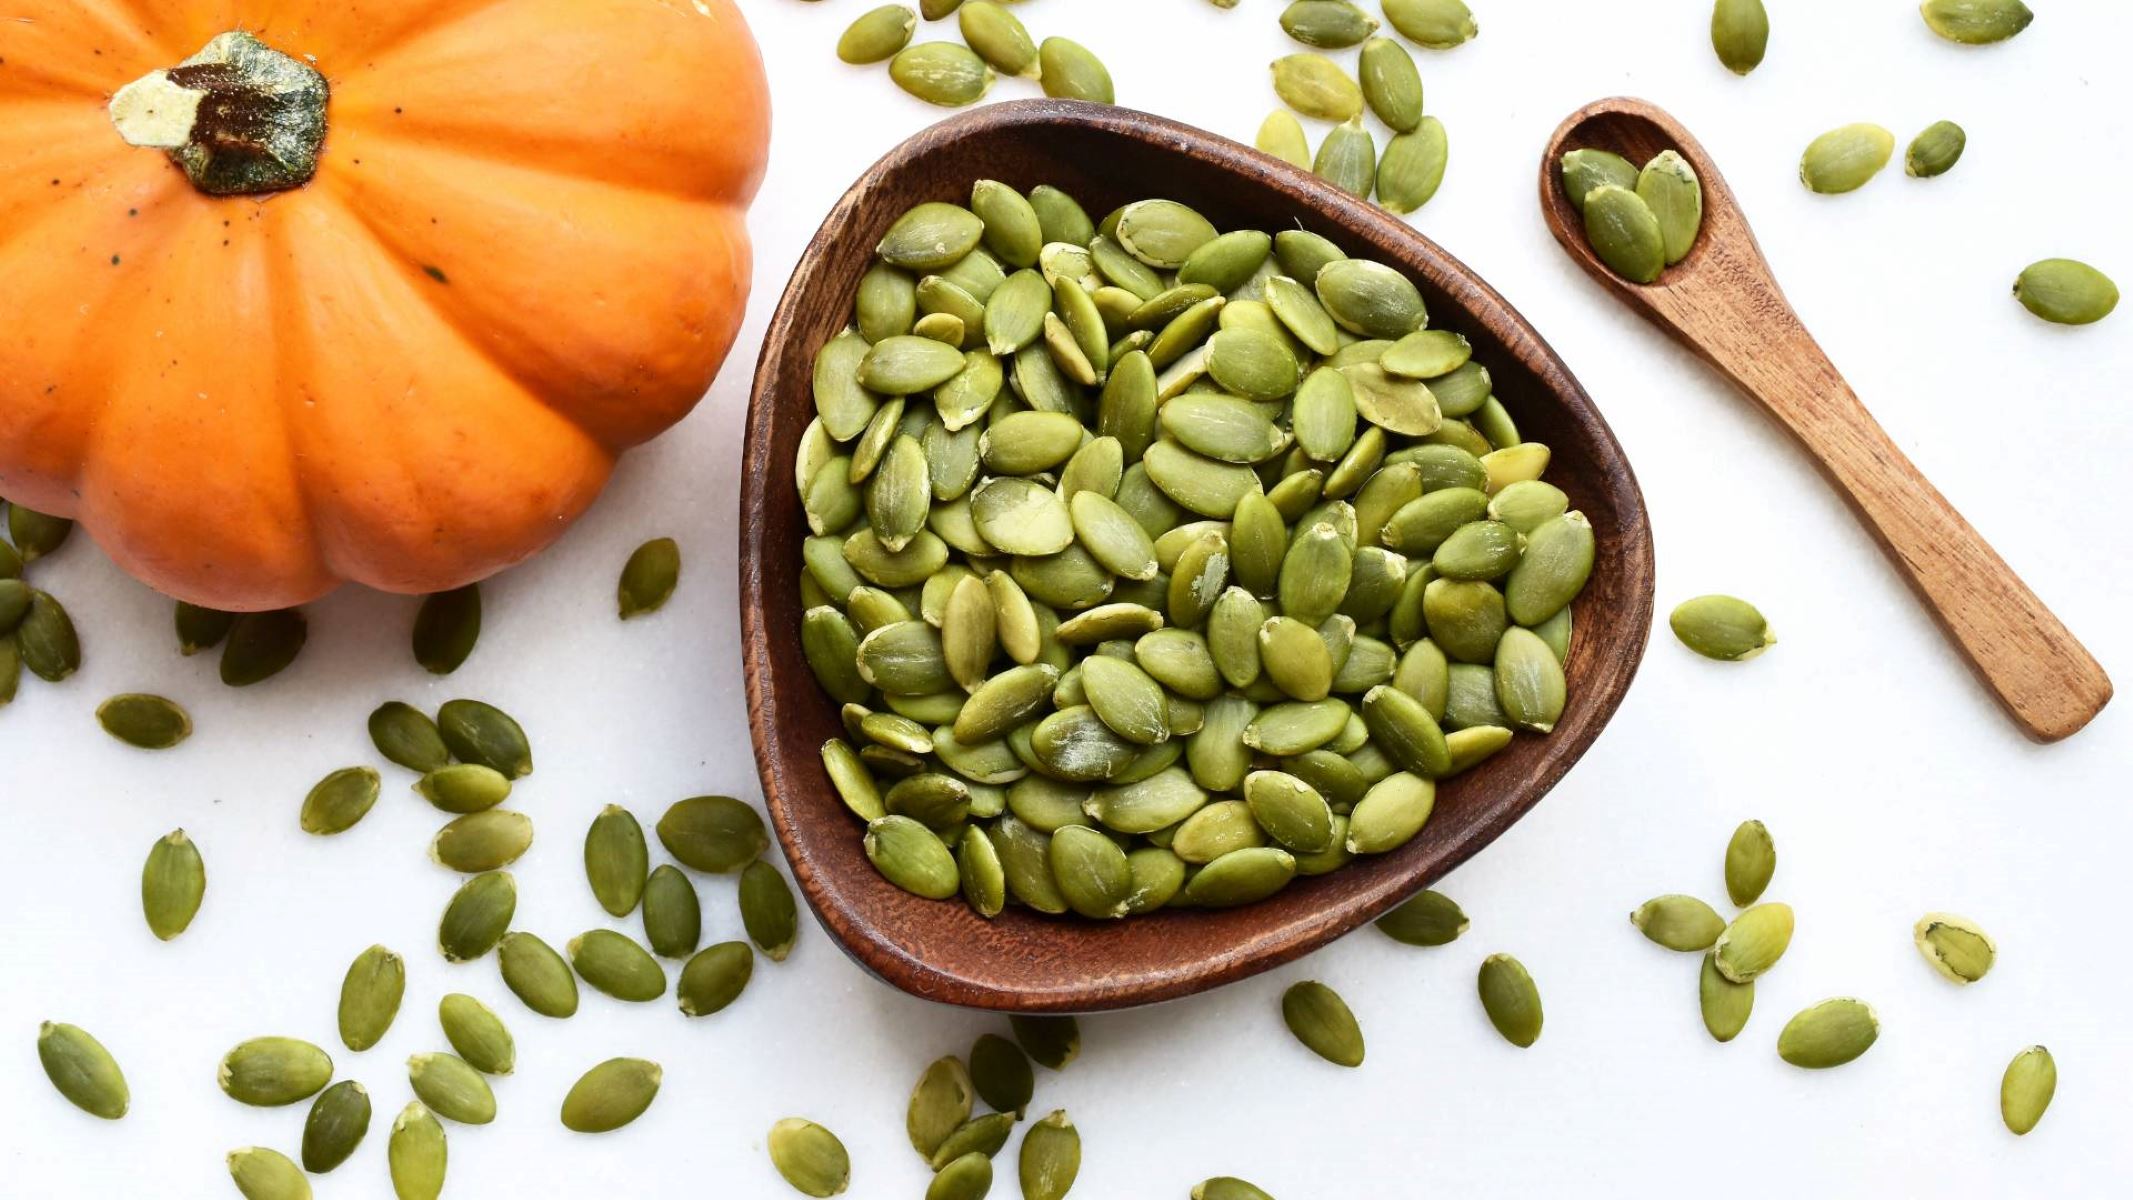 How To Use Pumpkin Seeds For Deworming